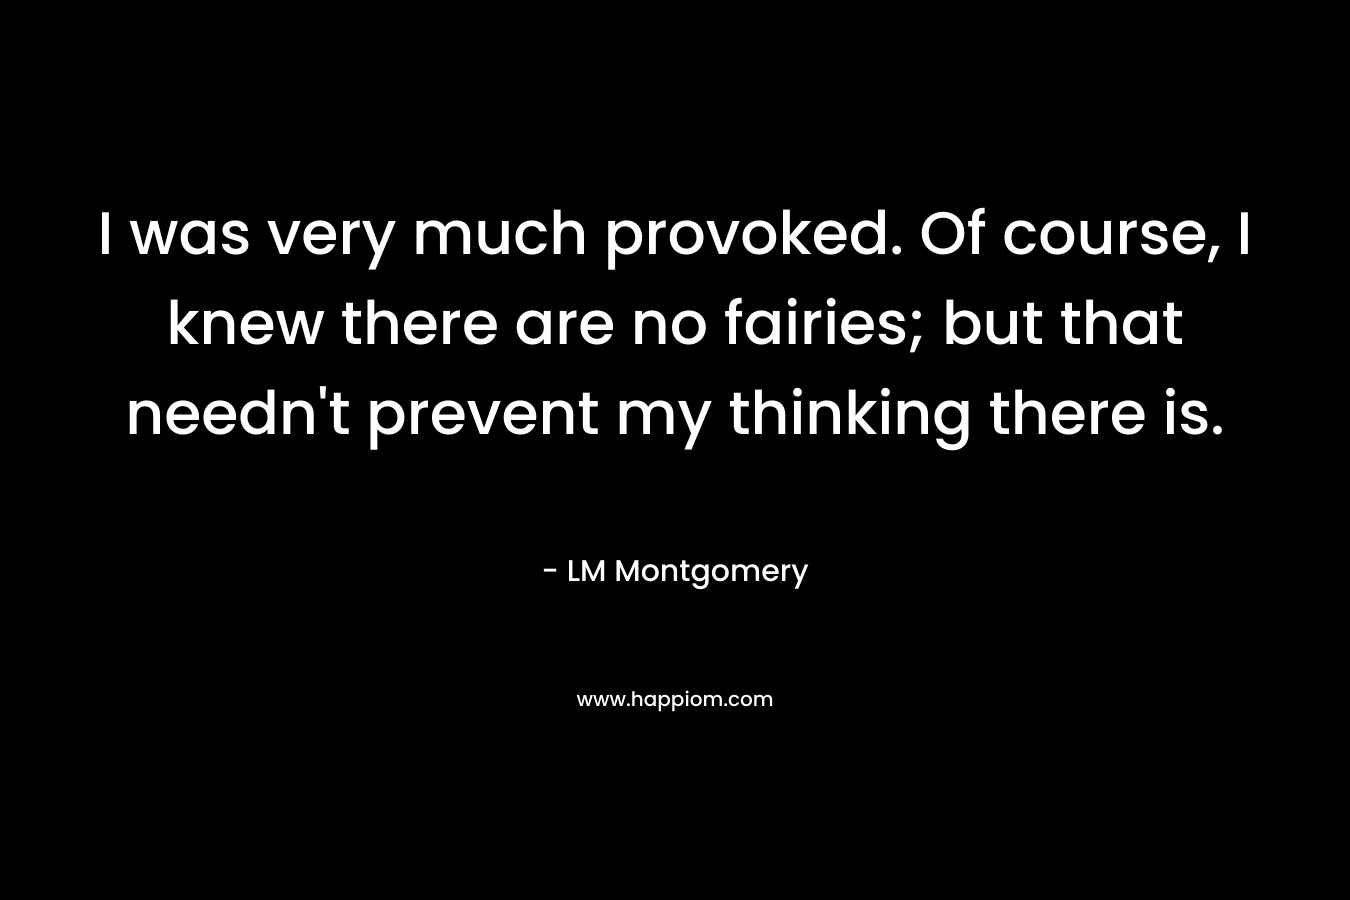 I was very much provoked. Of course, I knew there are no fairies; but that needn’t prevent my thinking there is. – LM Montgomery